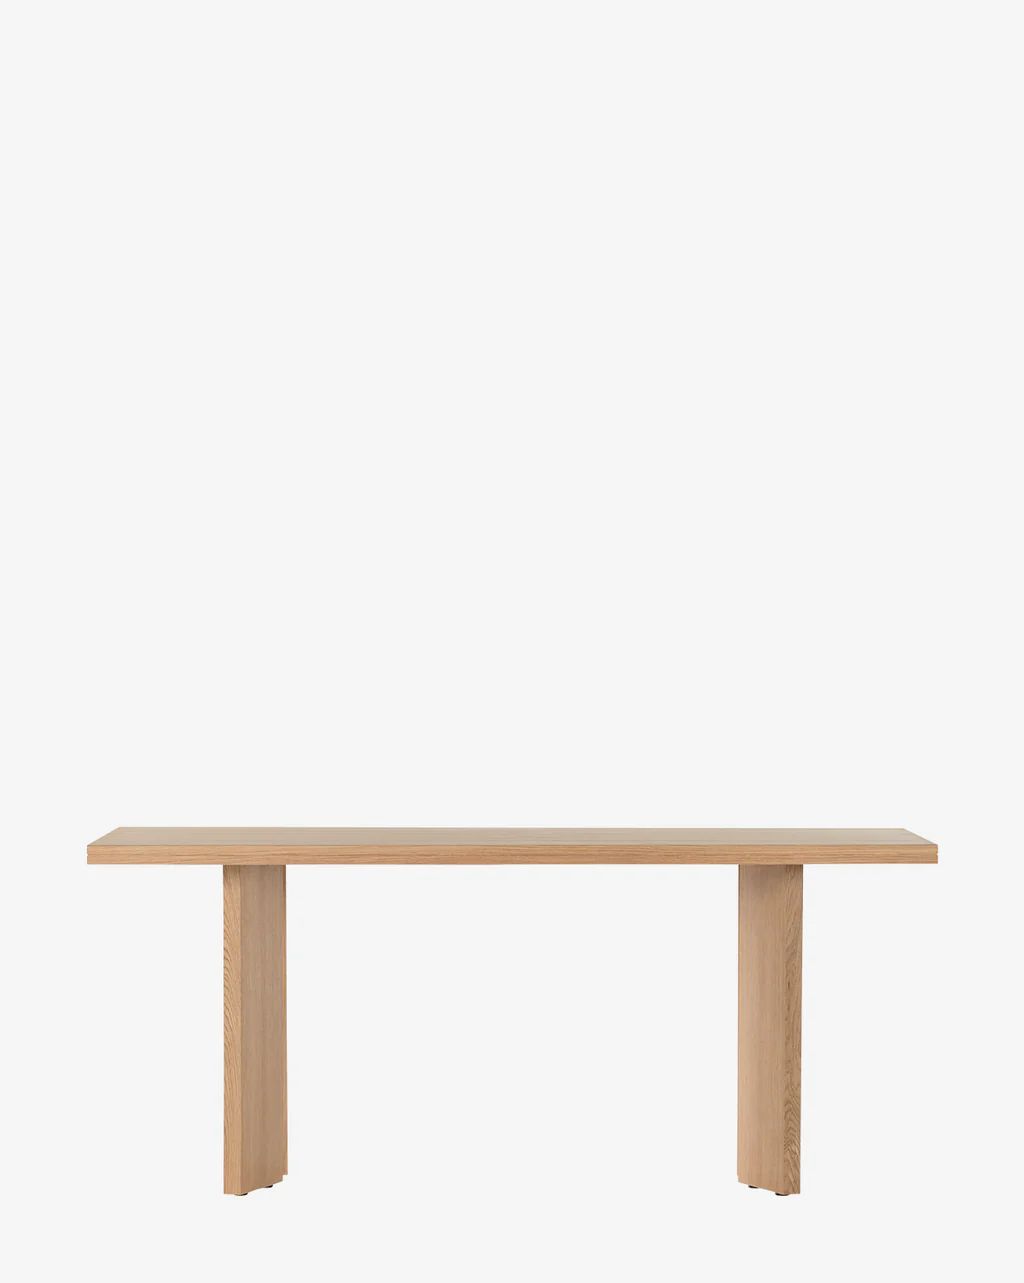 Althea Dining Table | McGee & Co.